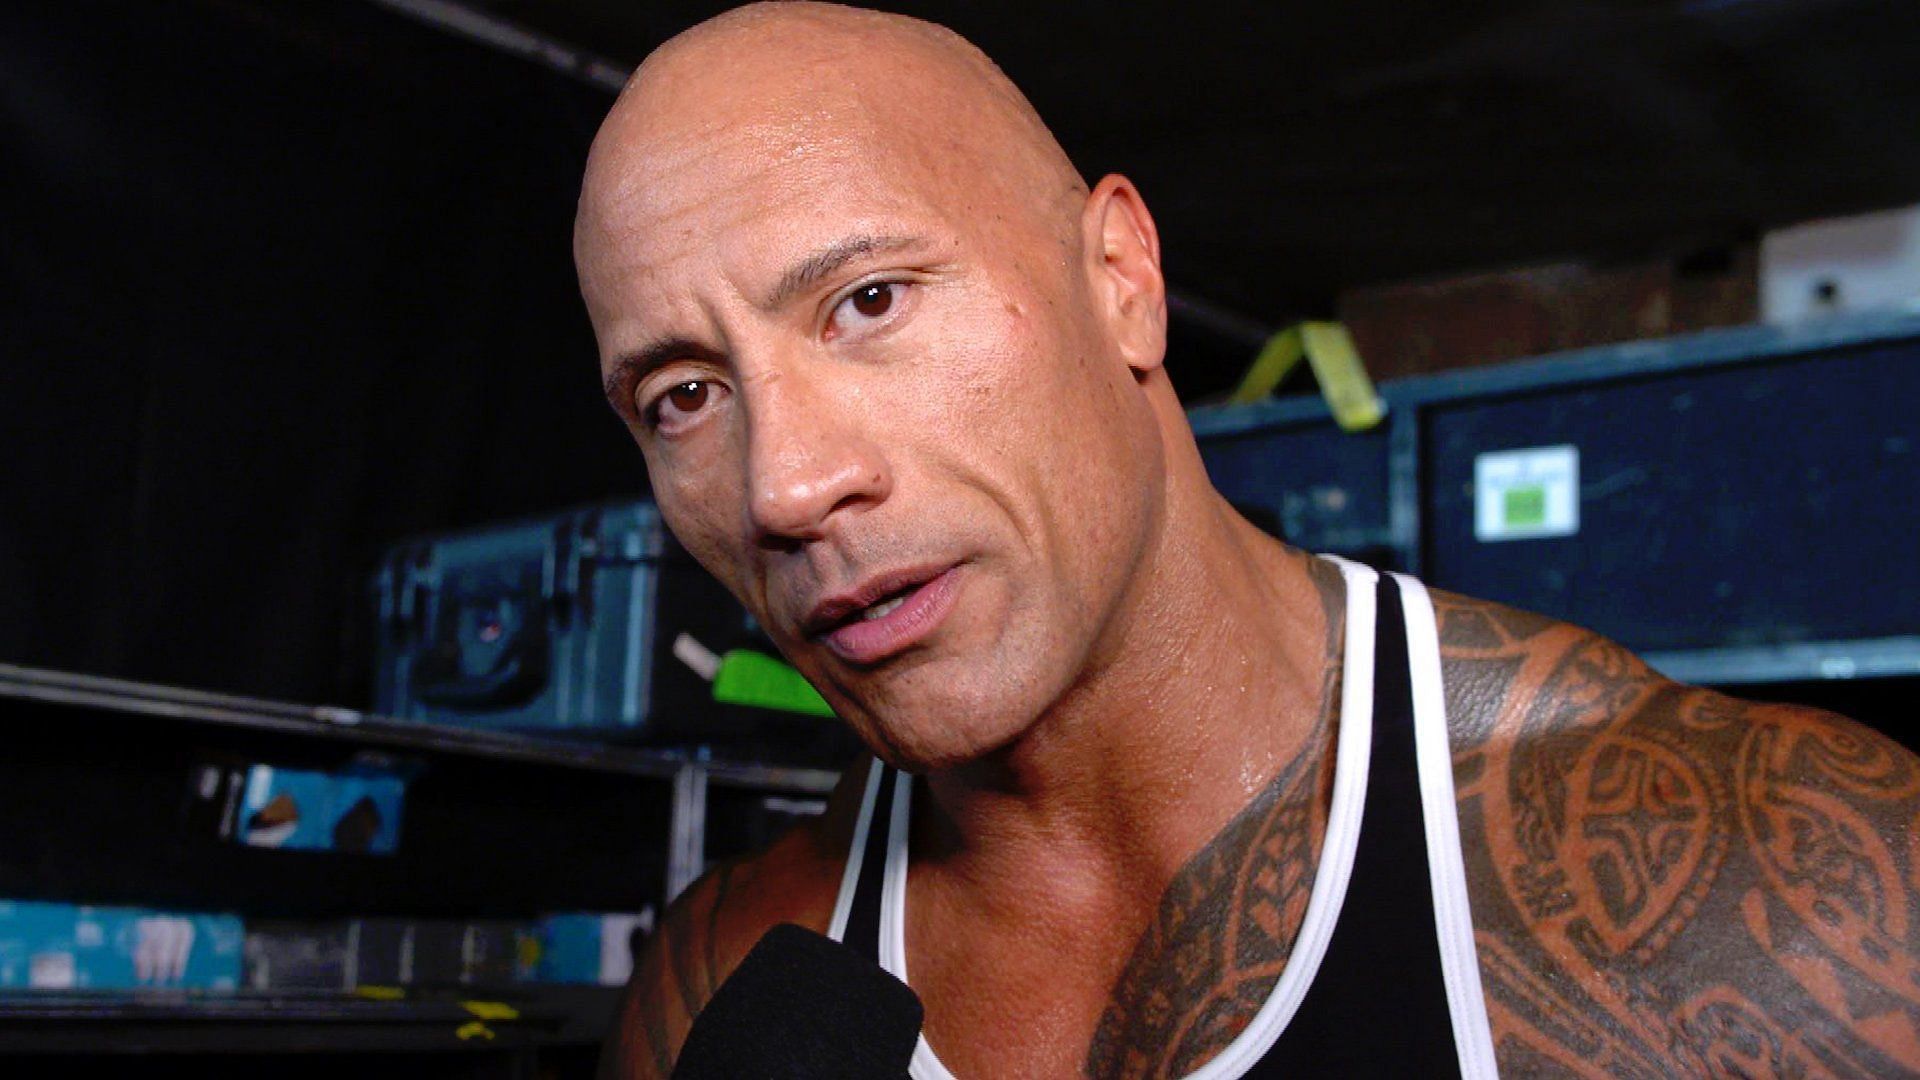 The Rock reunited with his longtime rival on SmackDown